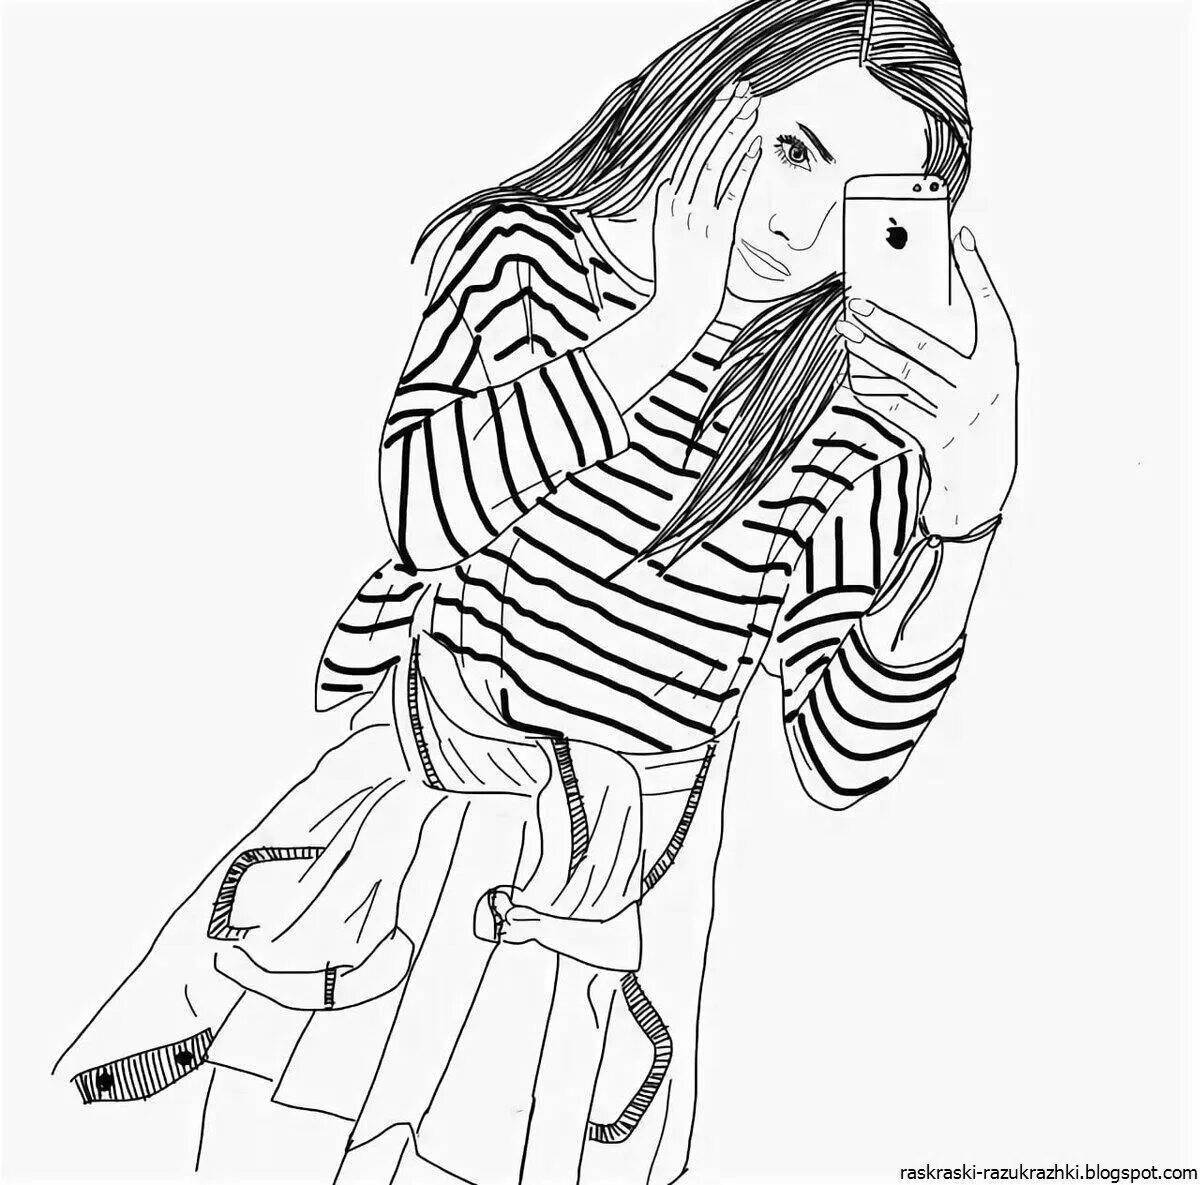 Charming coloring of a girl with iPhones